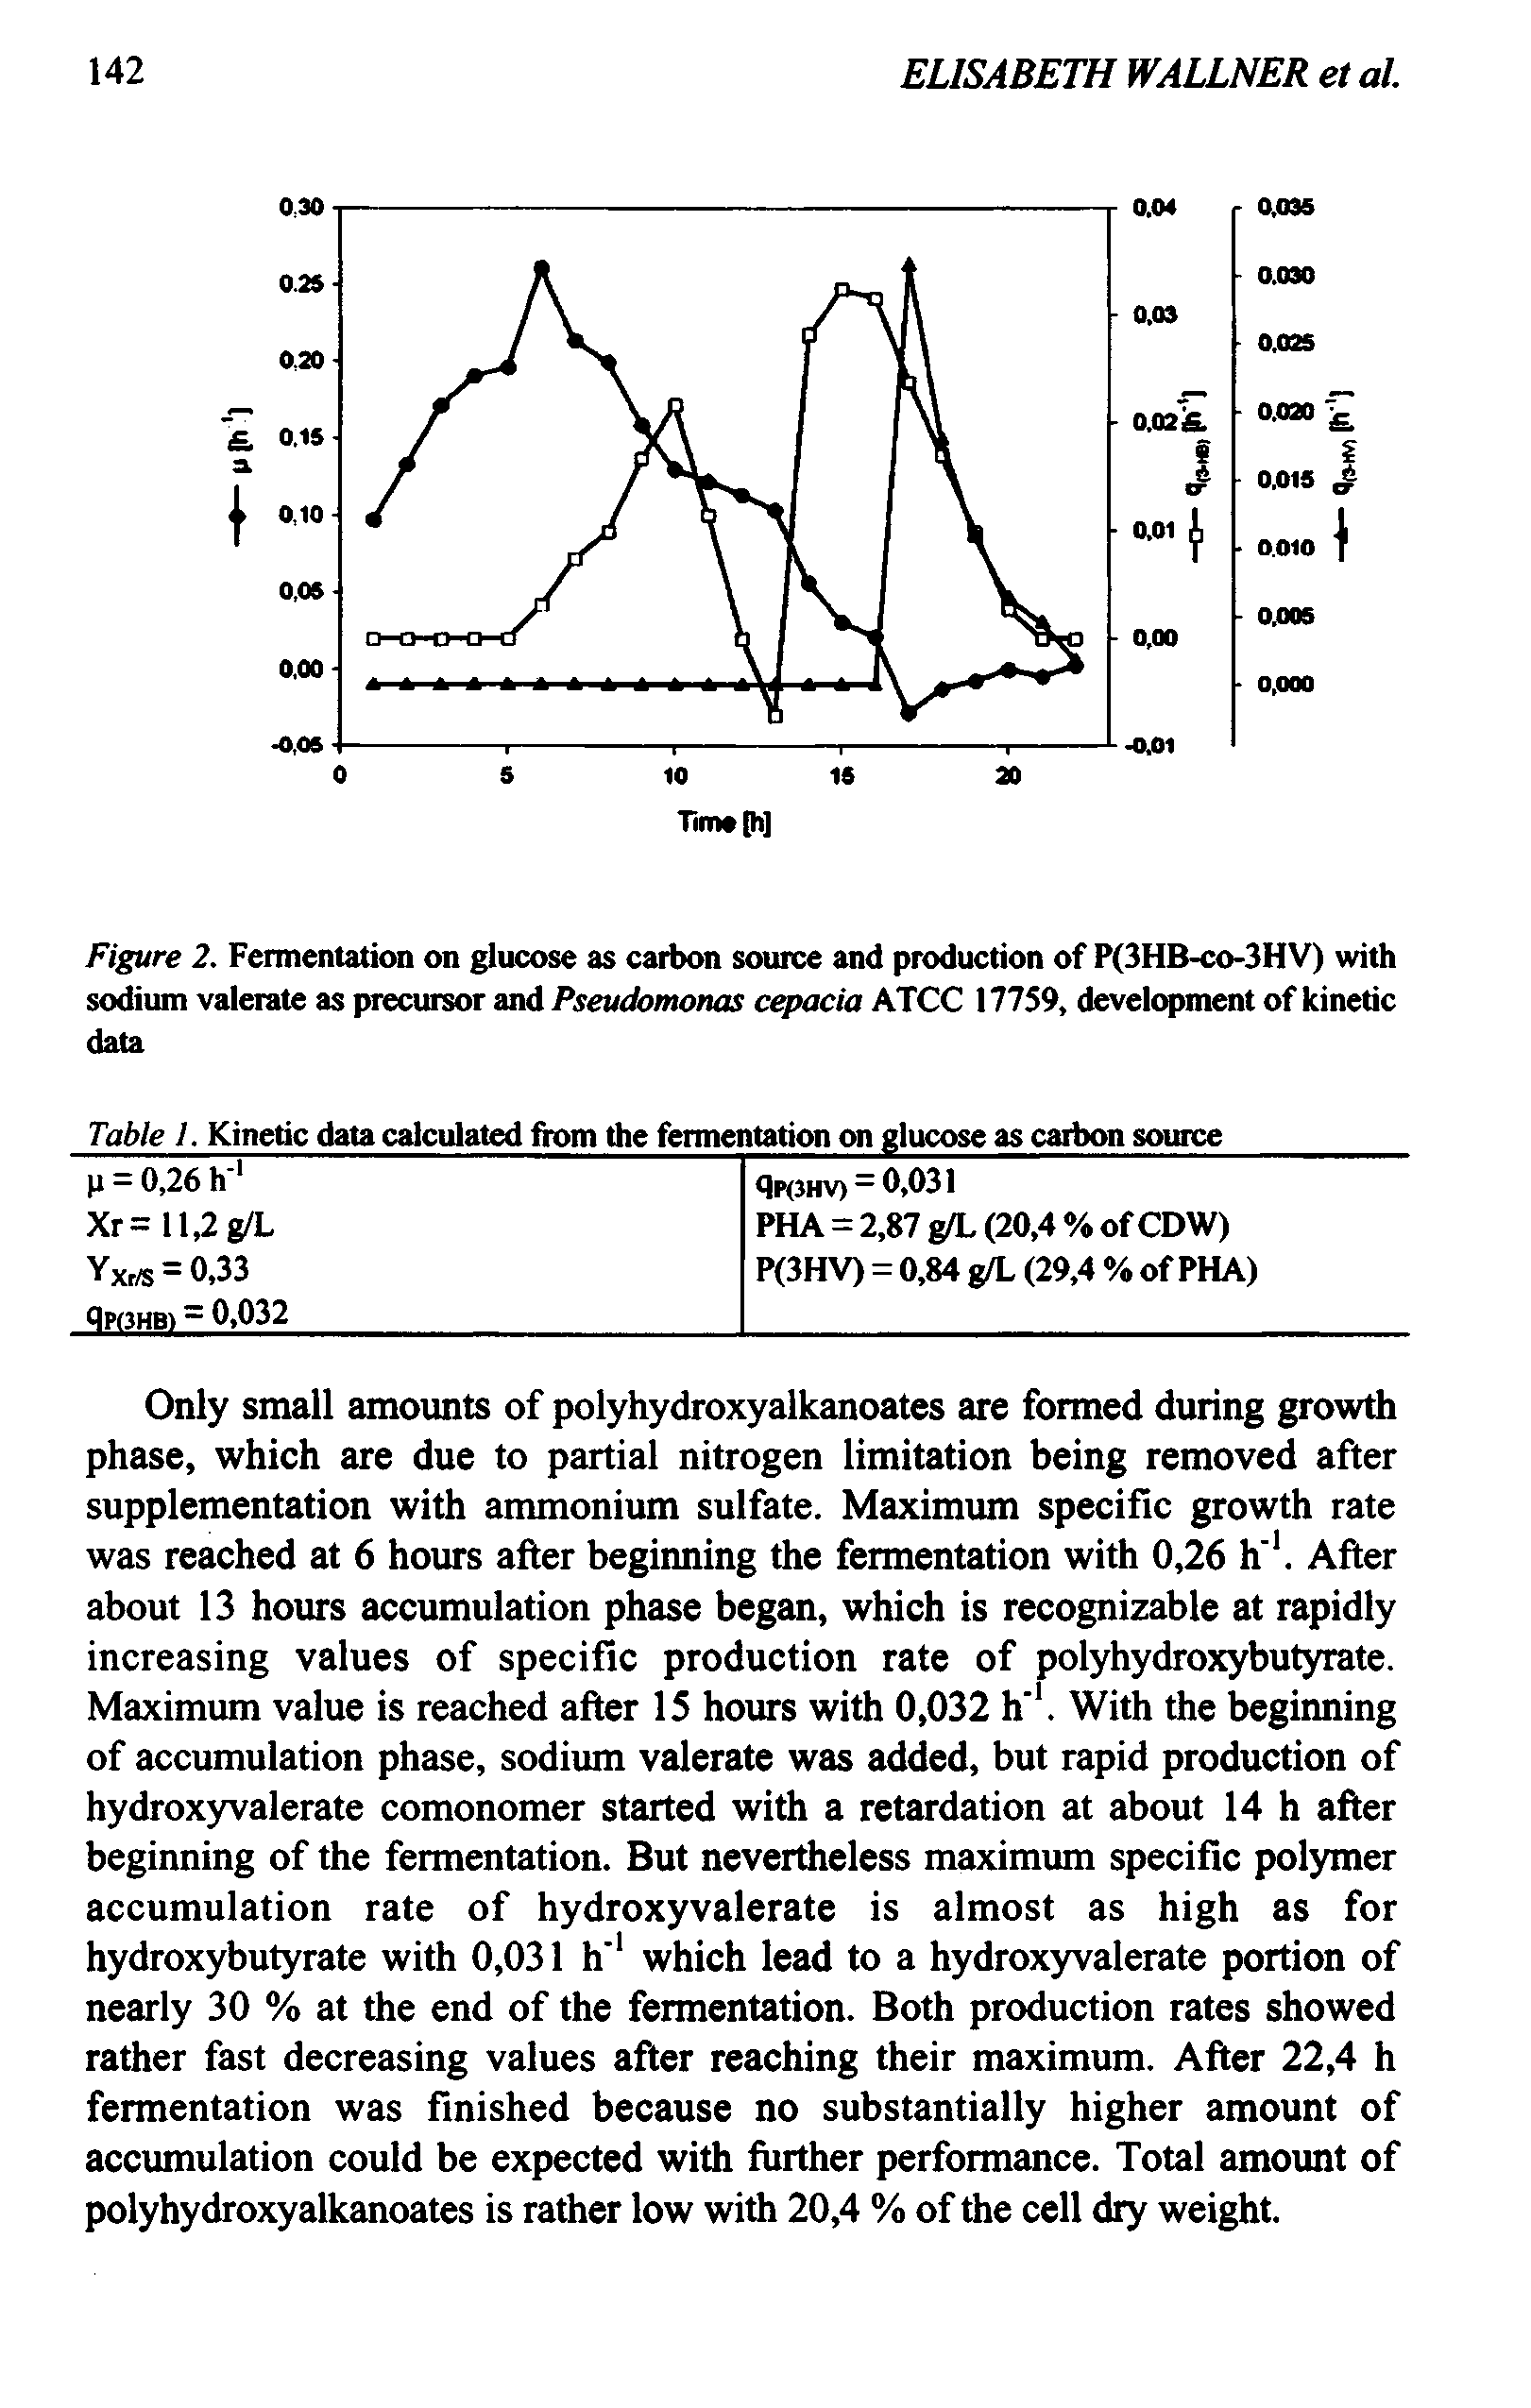 Table I. Kinetic data calculated from the fermentation on glucose as carbon source...